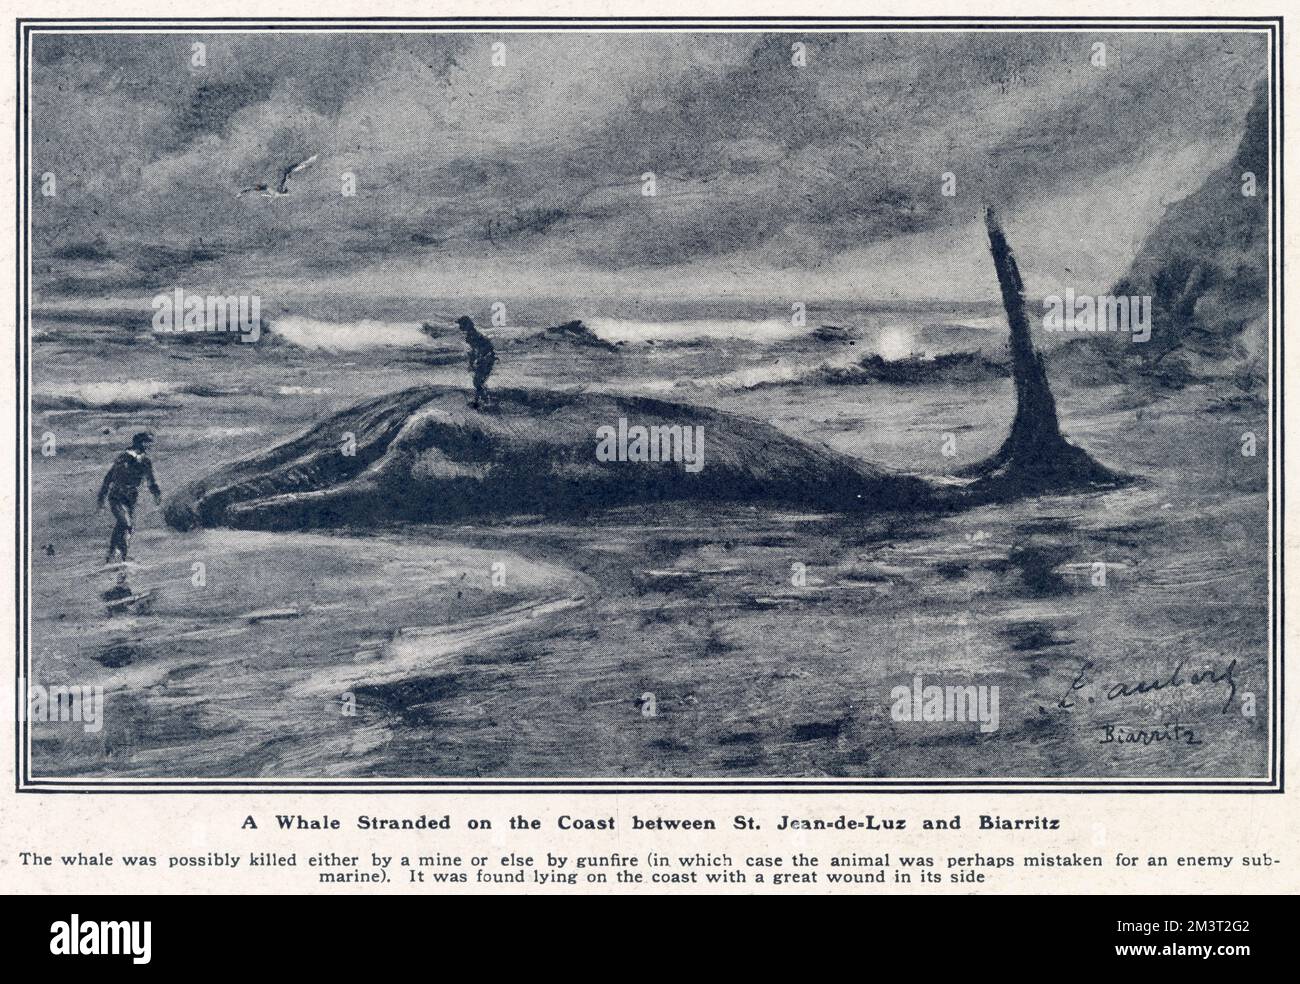 The immense body of a Whale stranded on the coast between St. Jean-de-Luz and Biarritz, France. Found with a great wound on its side, denoting death by a mine or possibly naval gunfire (mistaken perhaps for an enemy submarine). Stock Photo